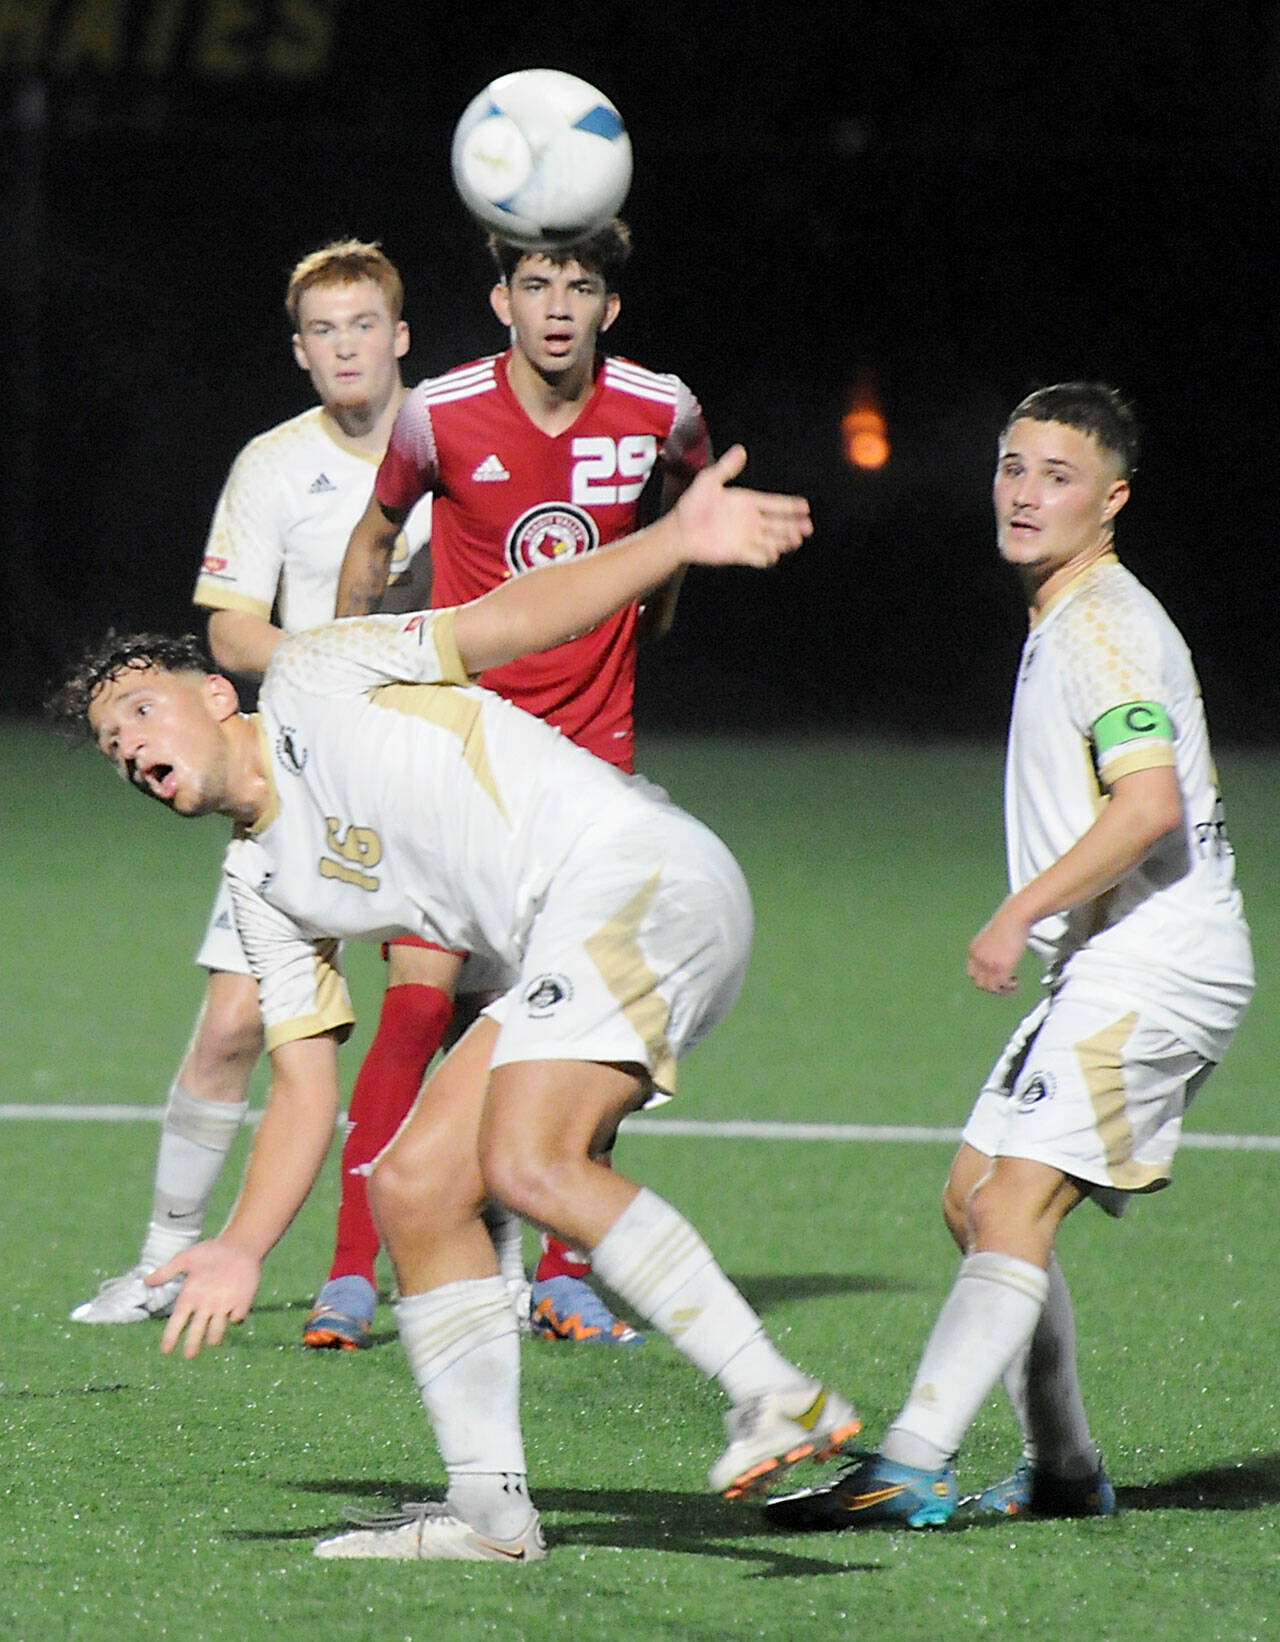 Peninsula’s Konrad Muller, front, lands off balance from a header as teammate Pipvan der Ende, rear left, Skagit Valley’s Iker Trevino and Peninsula’s Maurin Frehner, right, look on during Wednesday’s match at Peninsula College. (Keith Thorpe/Peninsula Daily News)